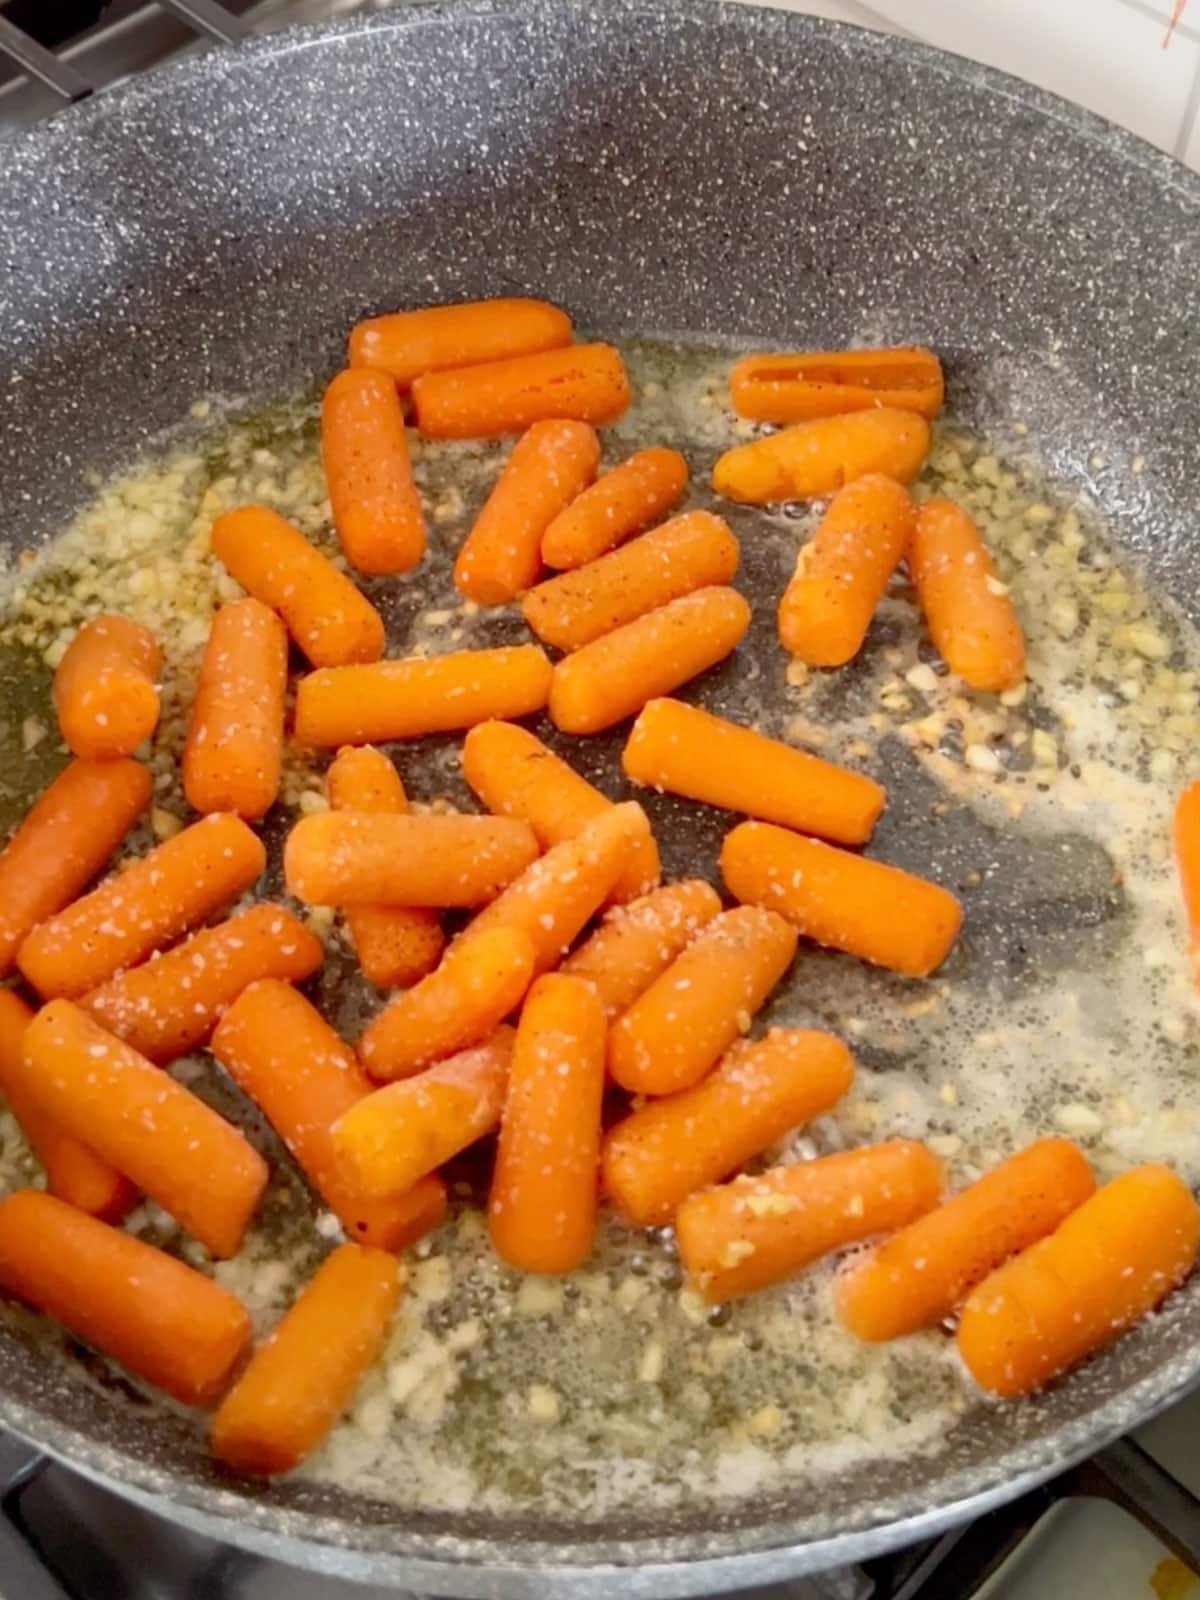 Carrots added to the how pan.